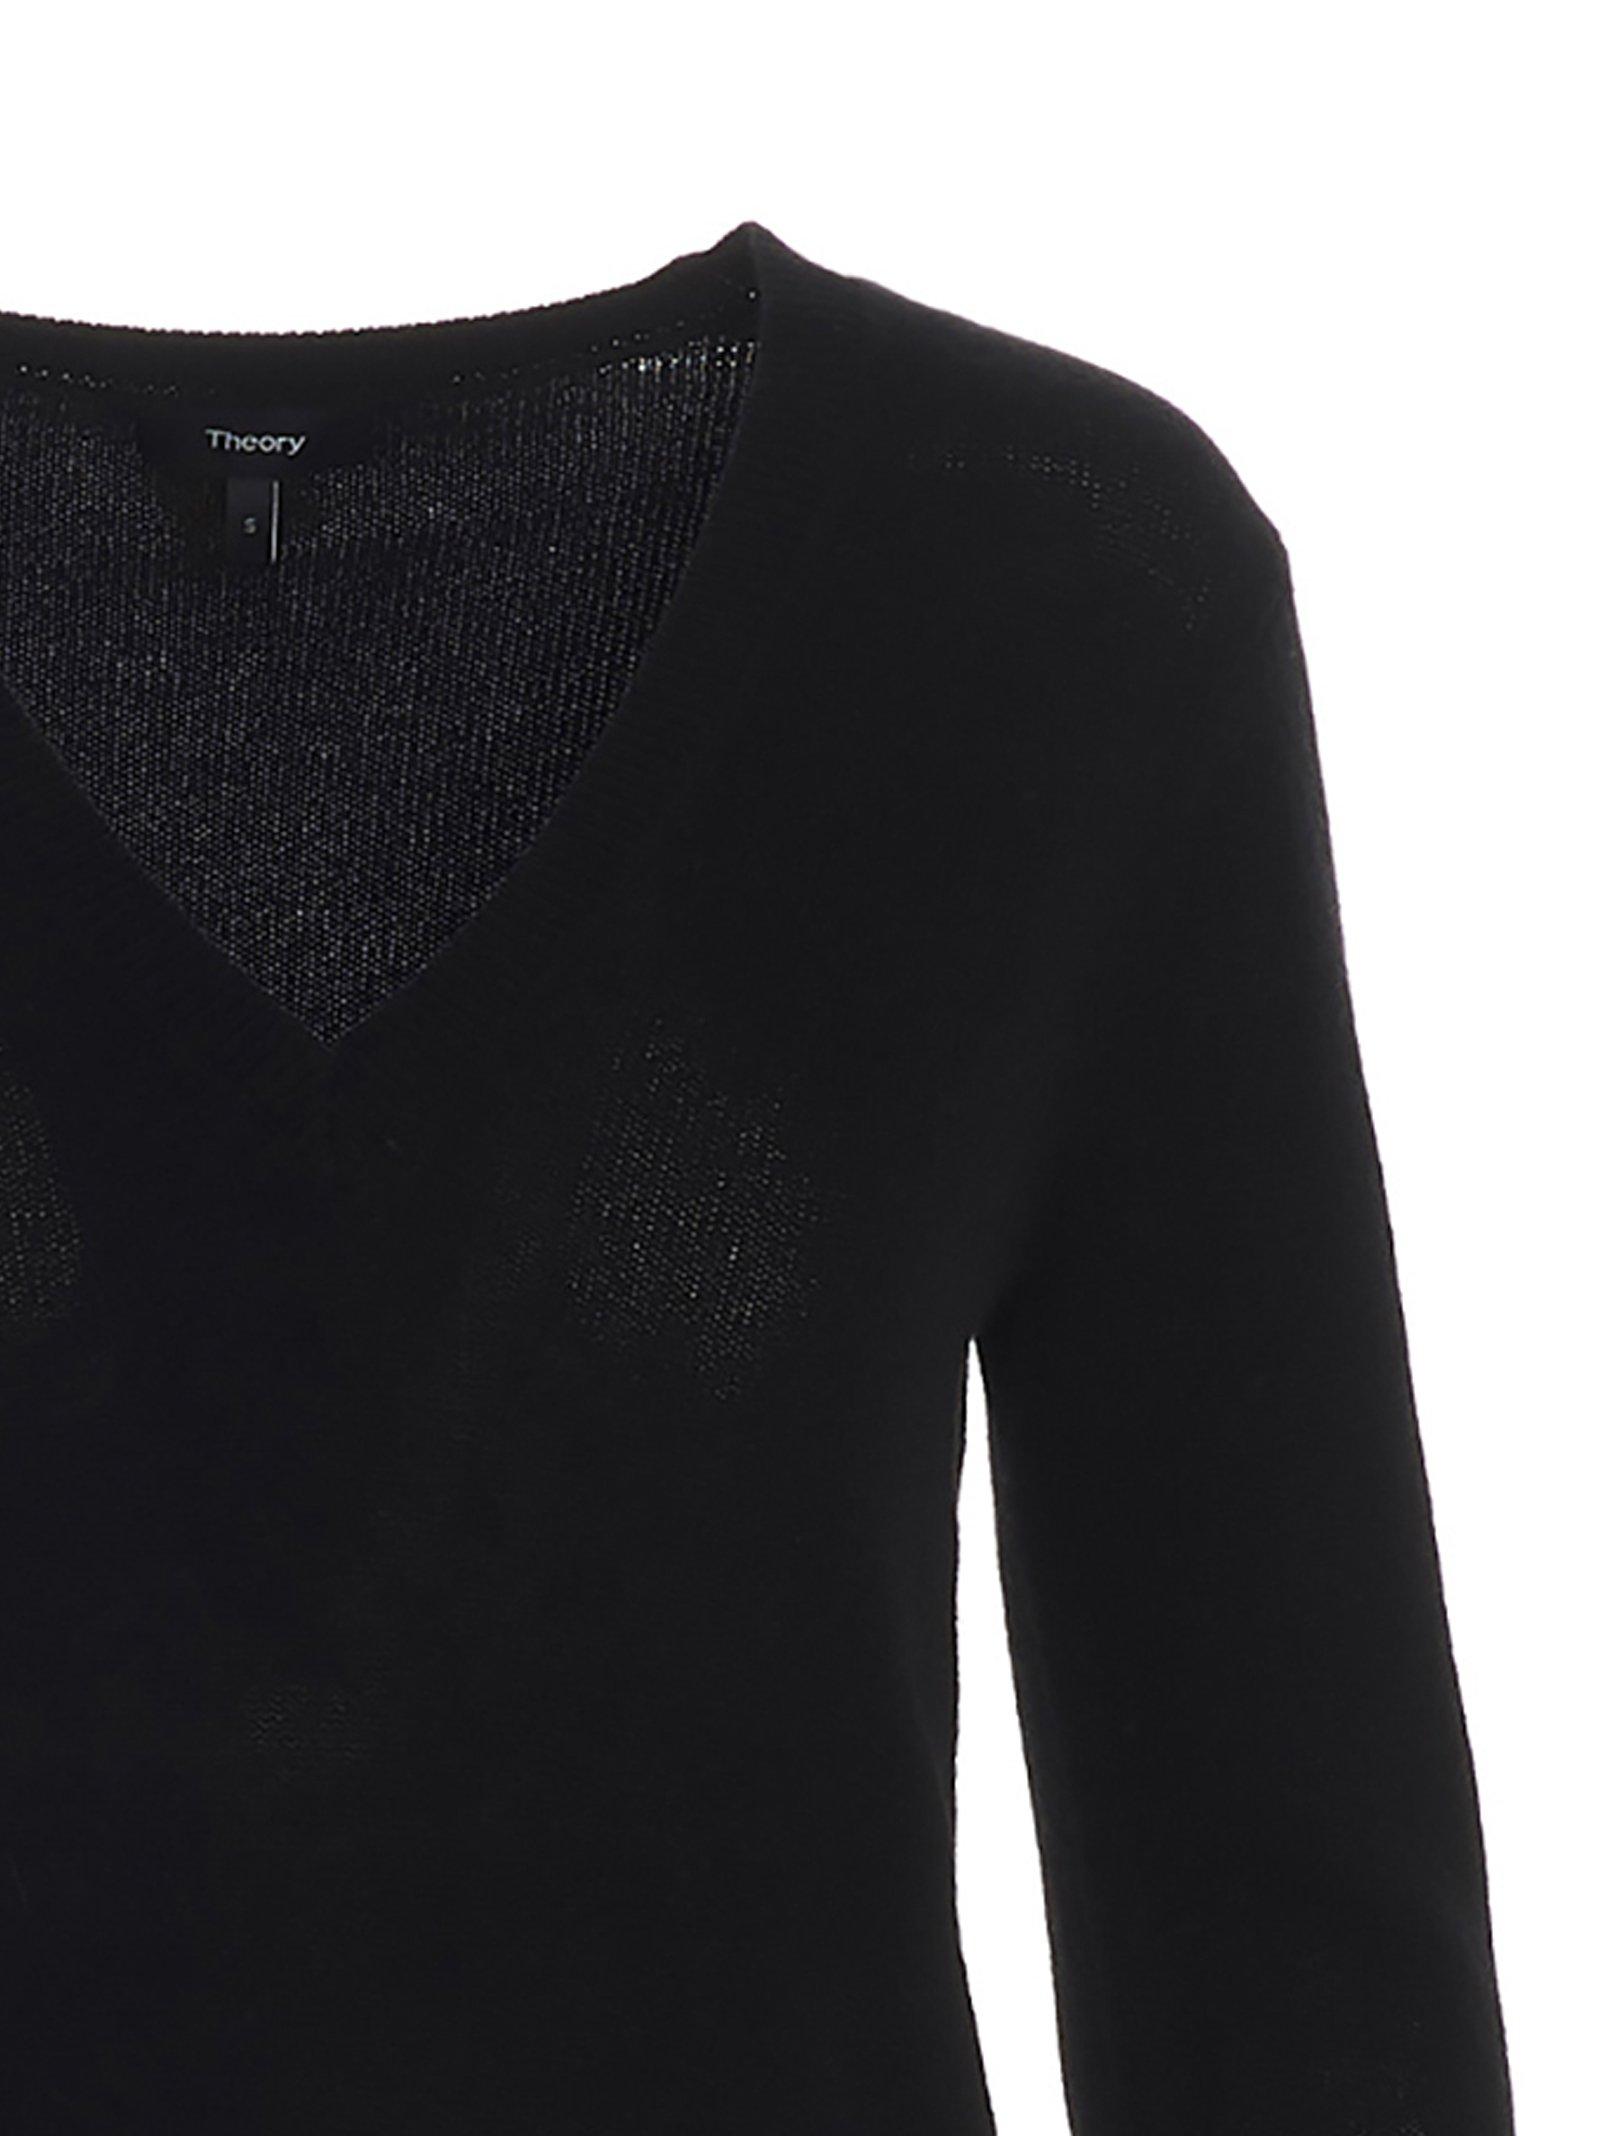 Theory Cashmere V-neck Sweater in Black - Lyst